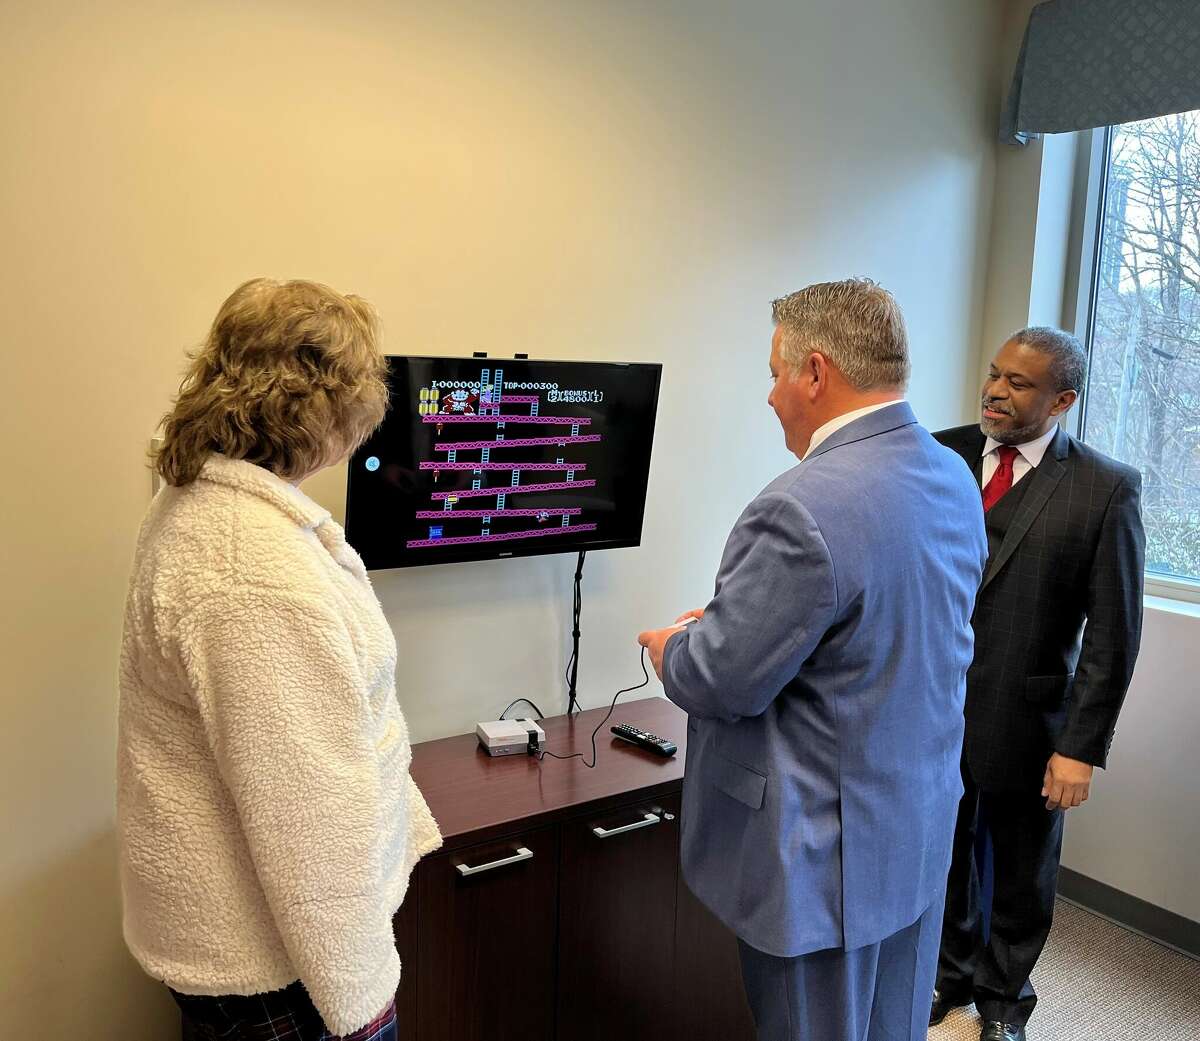 Albany County Executive Daniel McCoy, accompanied by Family Court Judge Richard Rivera and Albany County Department of Children, Youth and Families Moira Manning, tries his hand at the video game classic Donkey Kong at the ribbon-cutting of a special room for foster youth in Albany County Family Court on Friday, Feb. 24, 2023. The room is designed to ease the experience of Family Court for the youths.